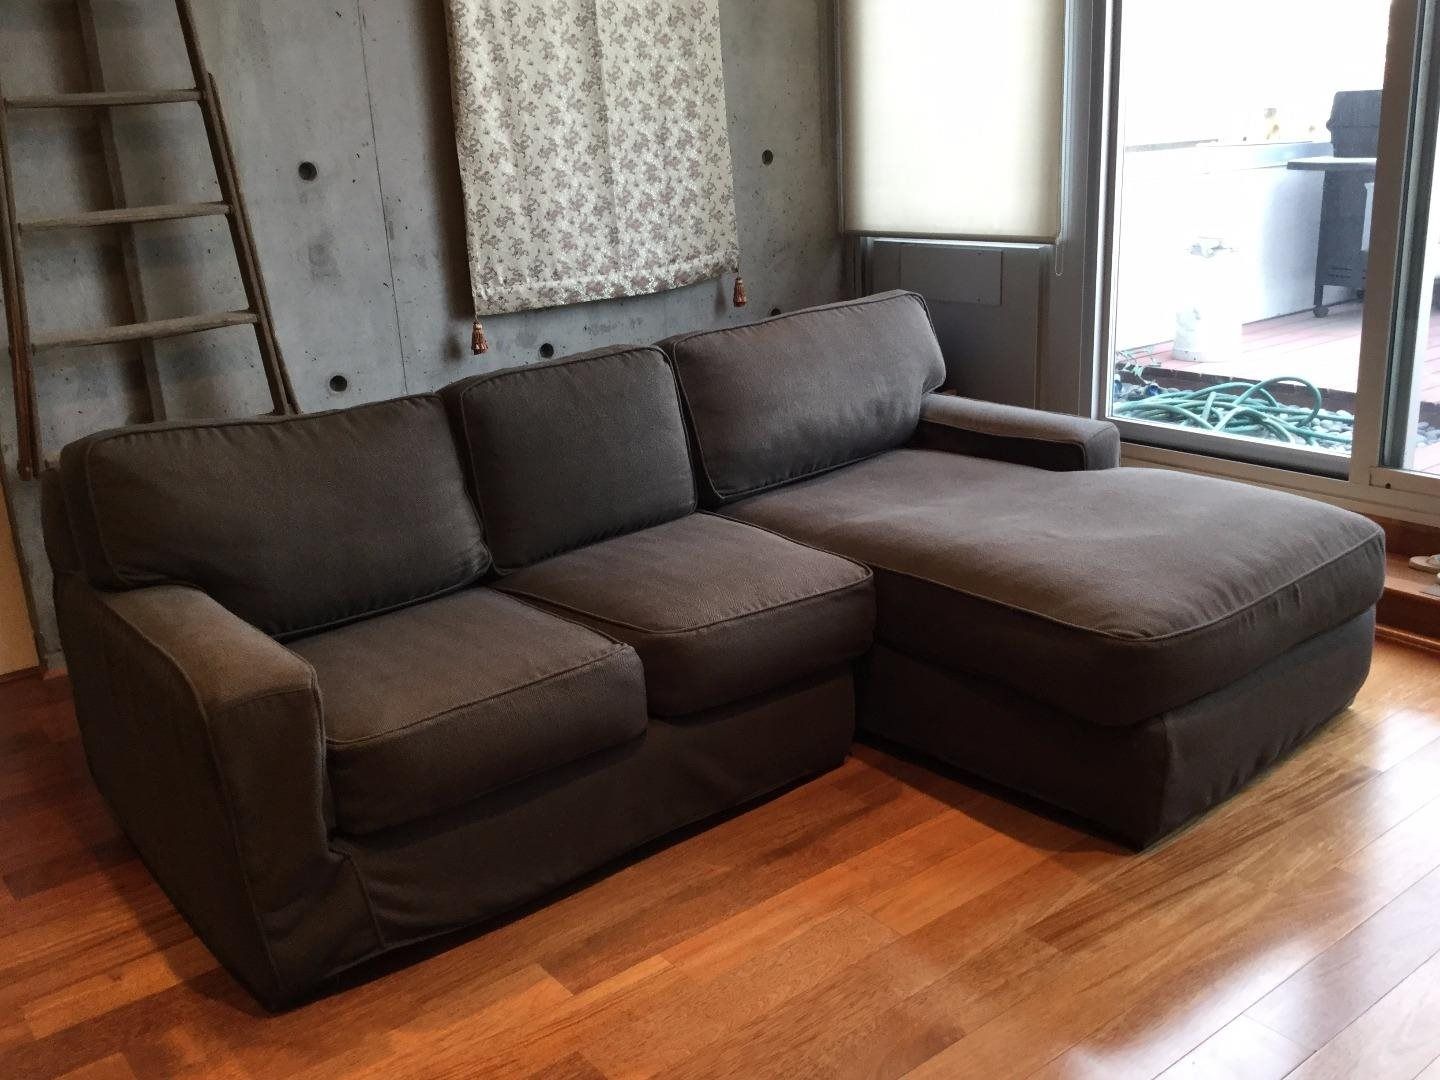 Quatrine Upholstered Sectional Sofa: For Sale In San Francisco, Ca Intended For Quatrine Sectional Sofas (View 7 of 10)